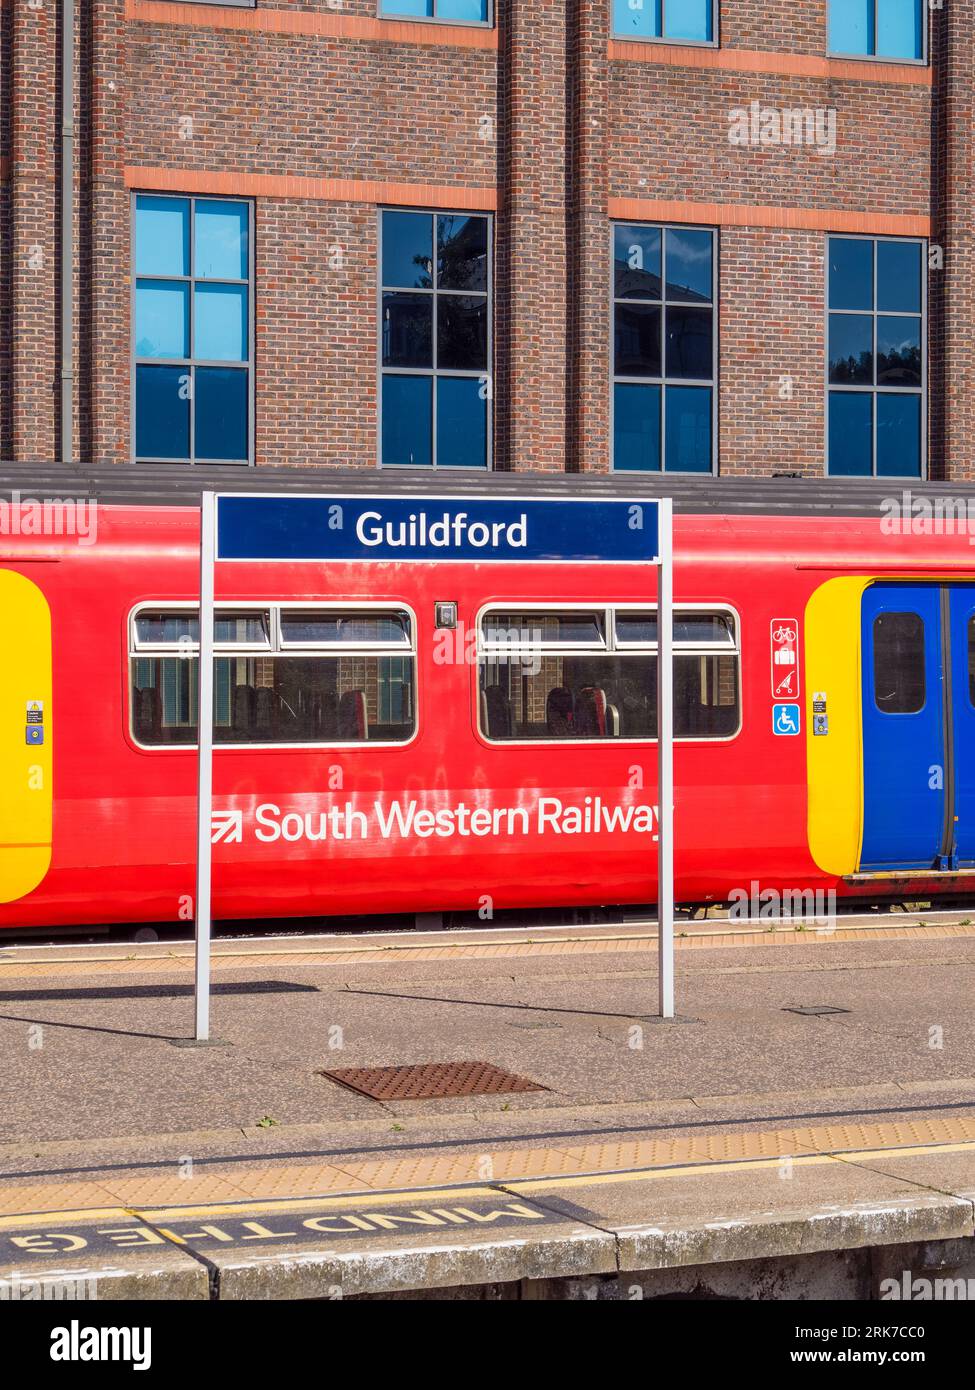 Guildford Railway Station, Guildford, Surrey, England, UK, GB. Stock Photo